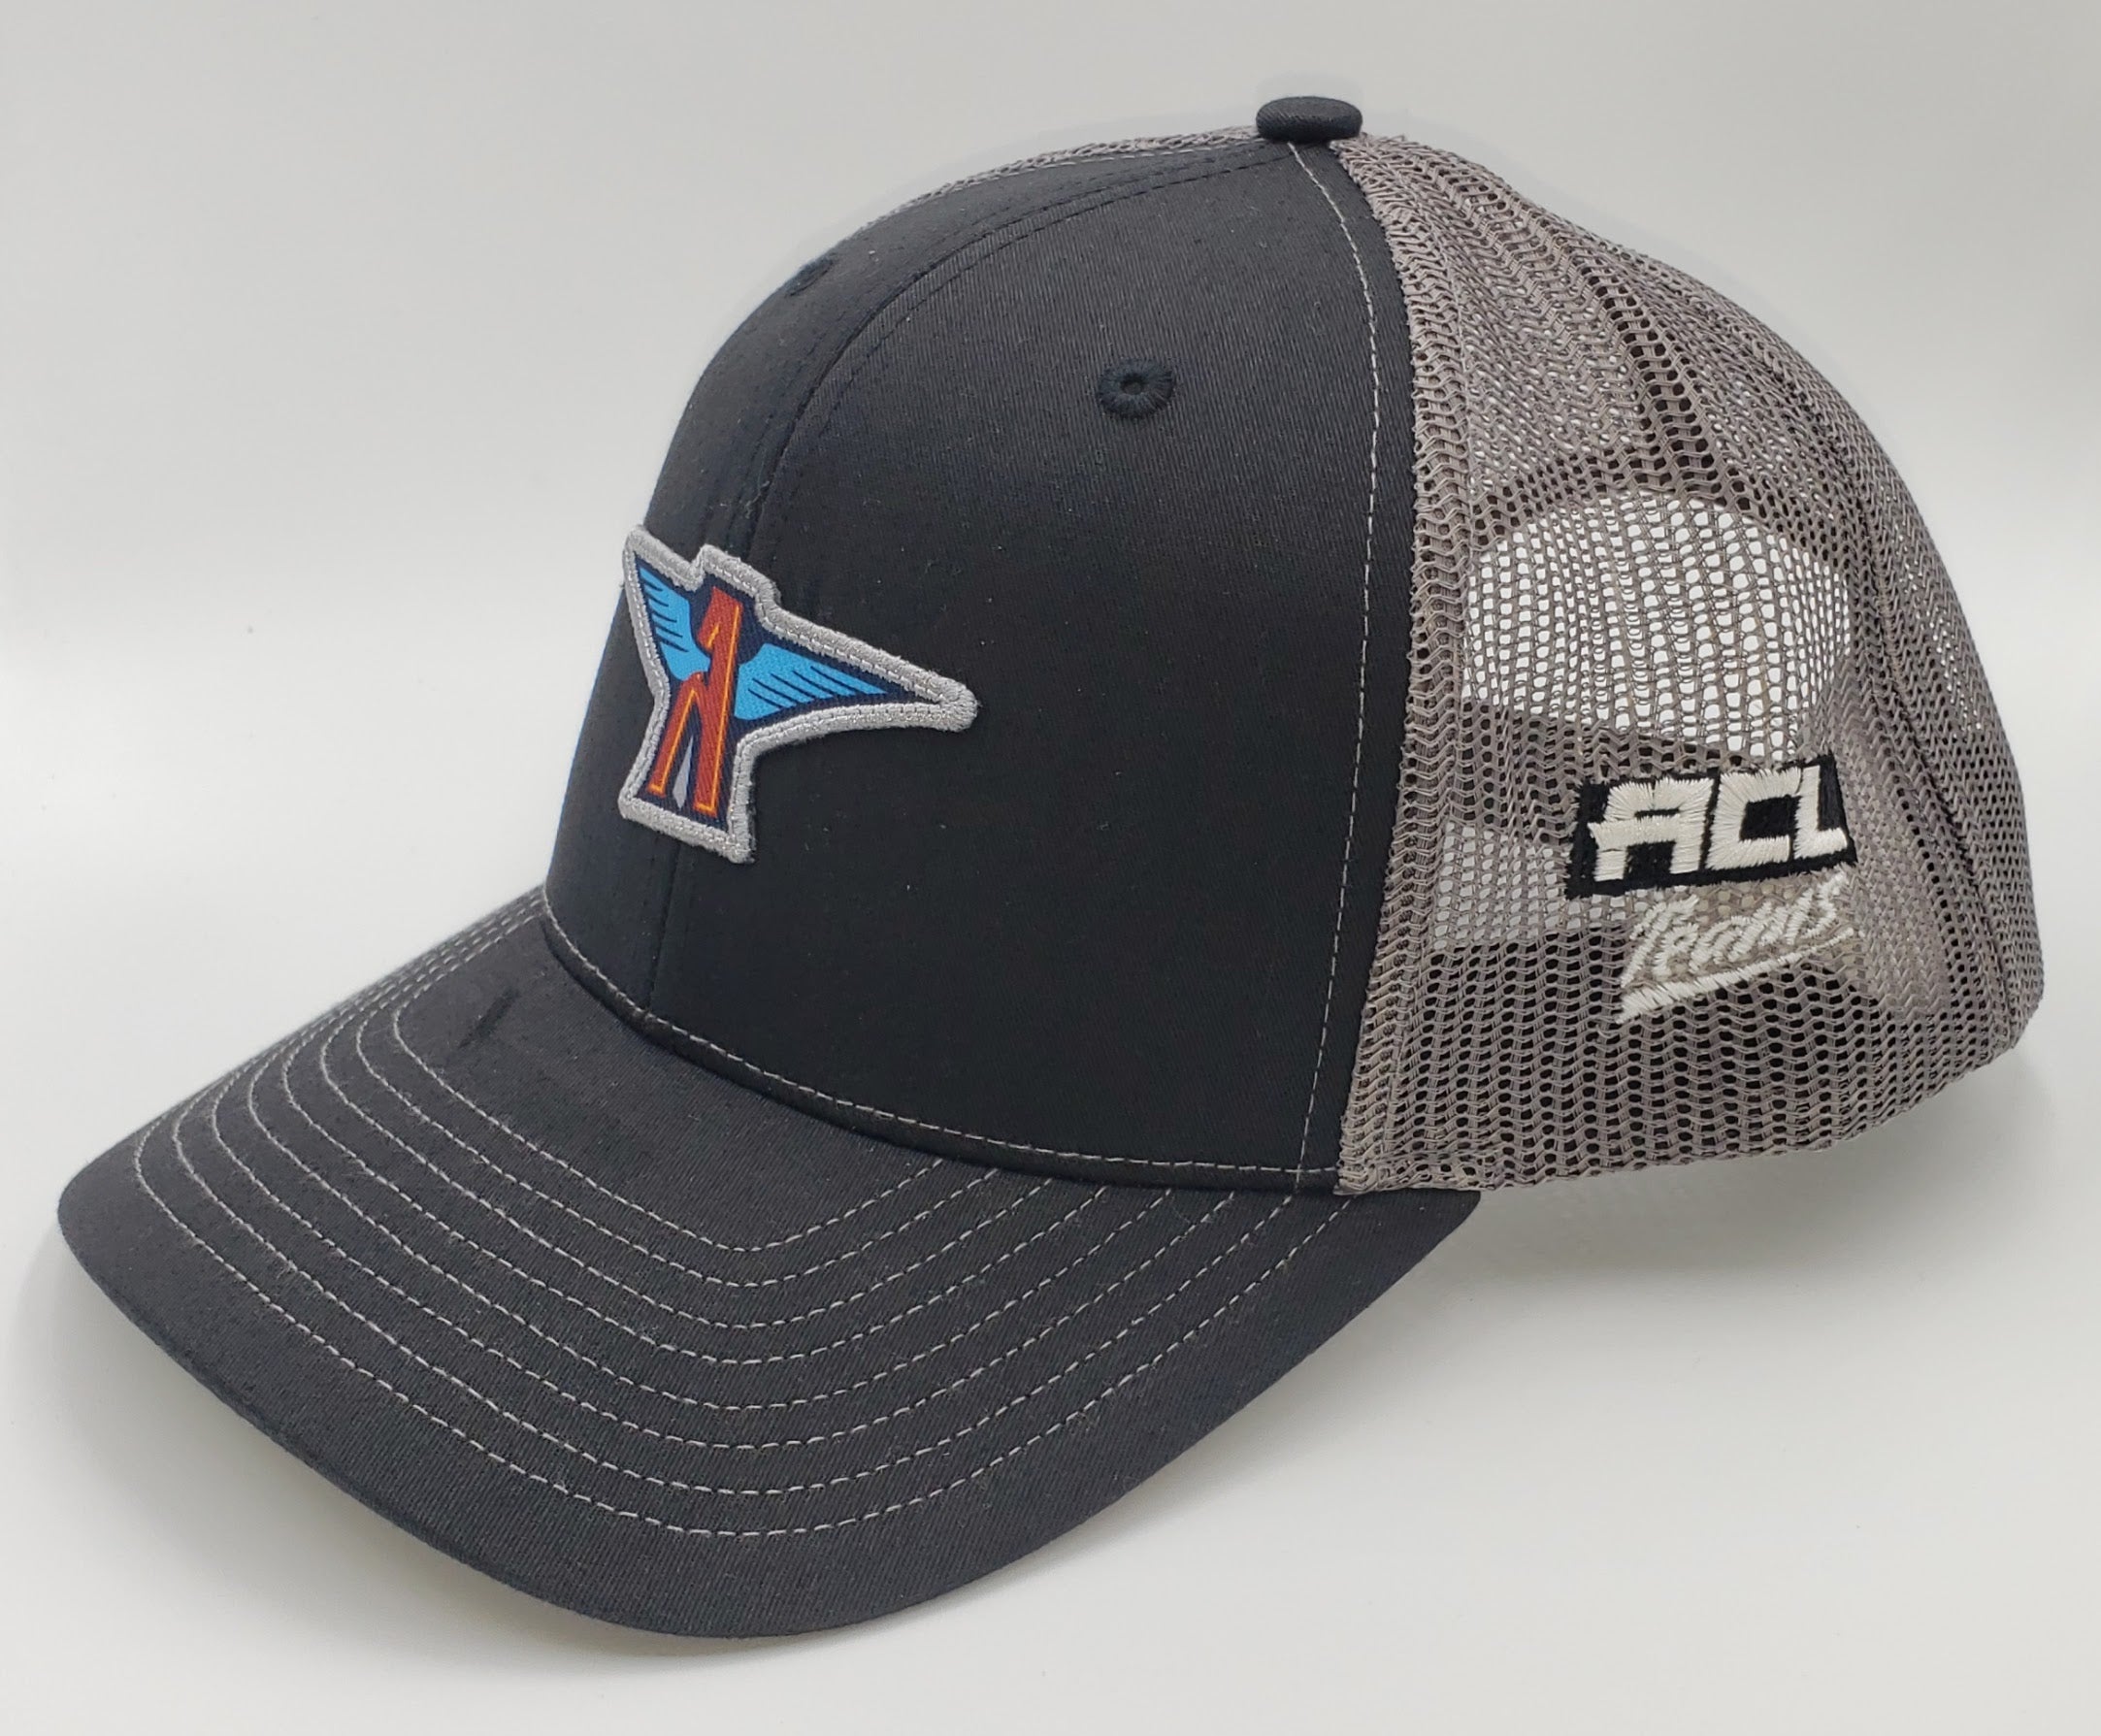 ACL Teams Hats - Virginia Cutters